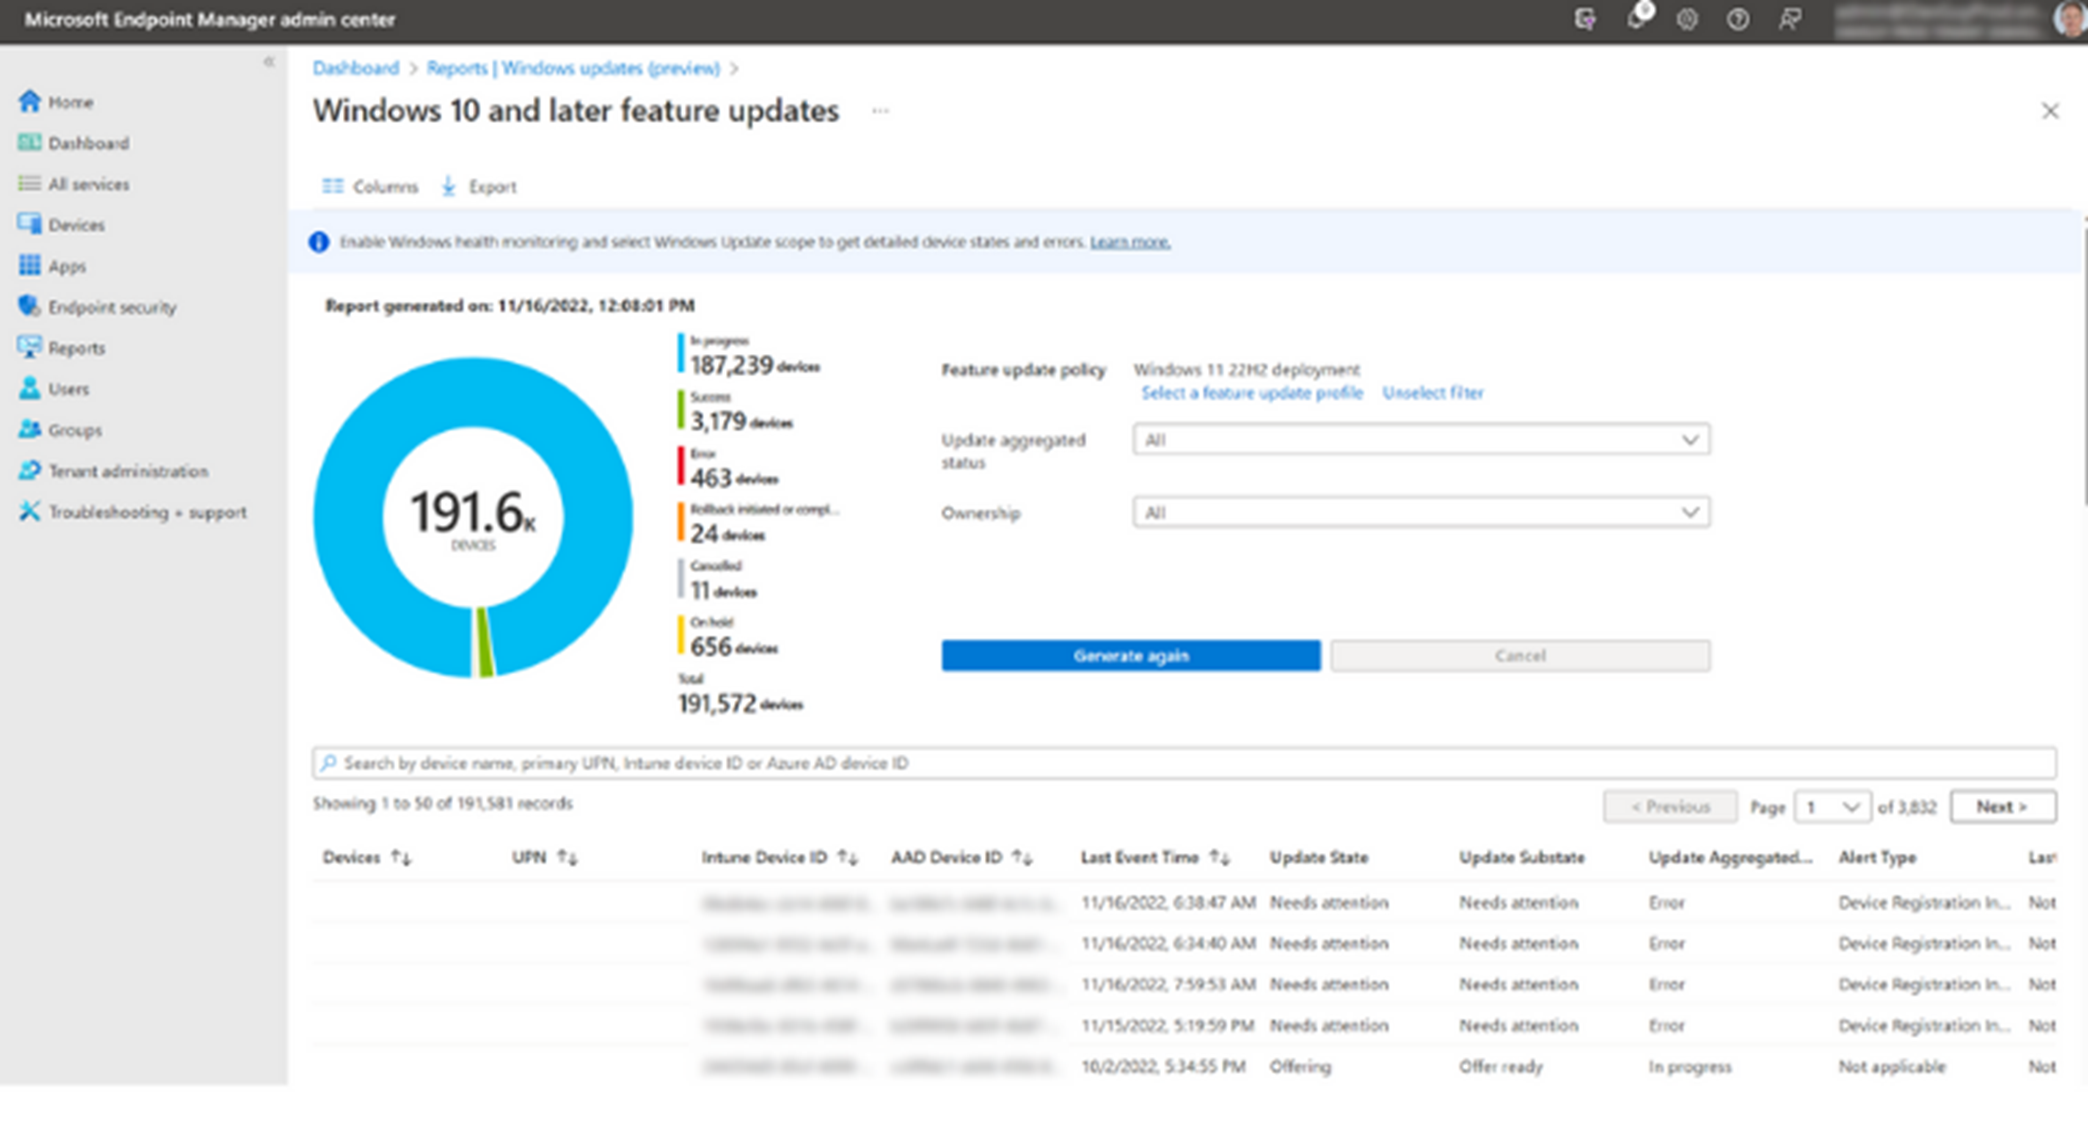 Microsoft Intune: Feature and expedited update management generally available